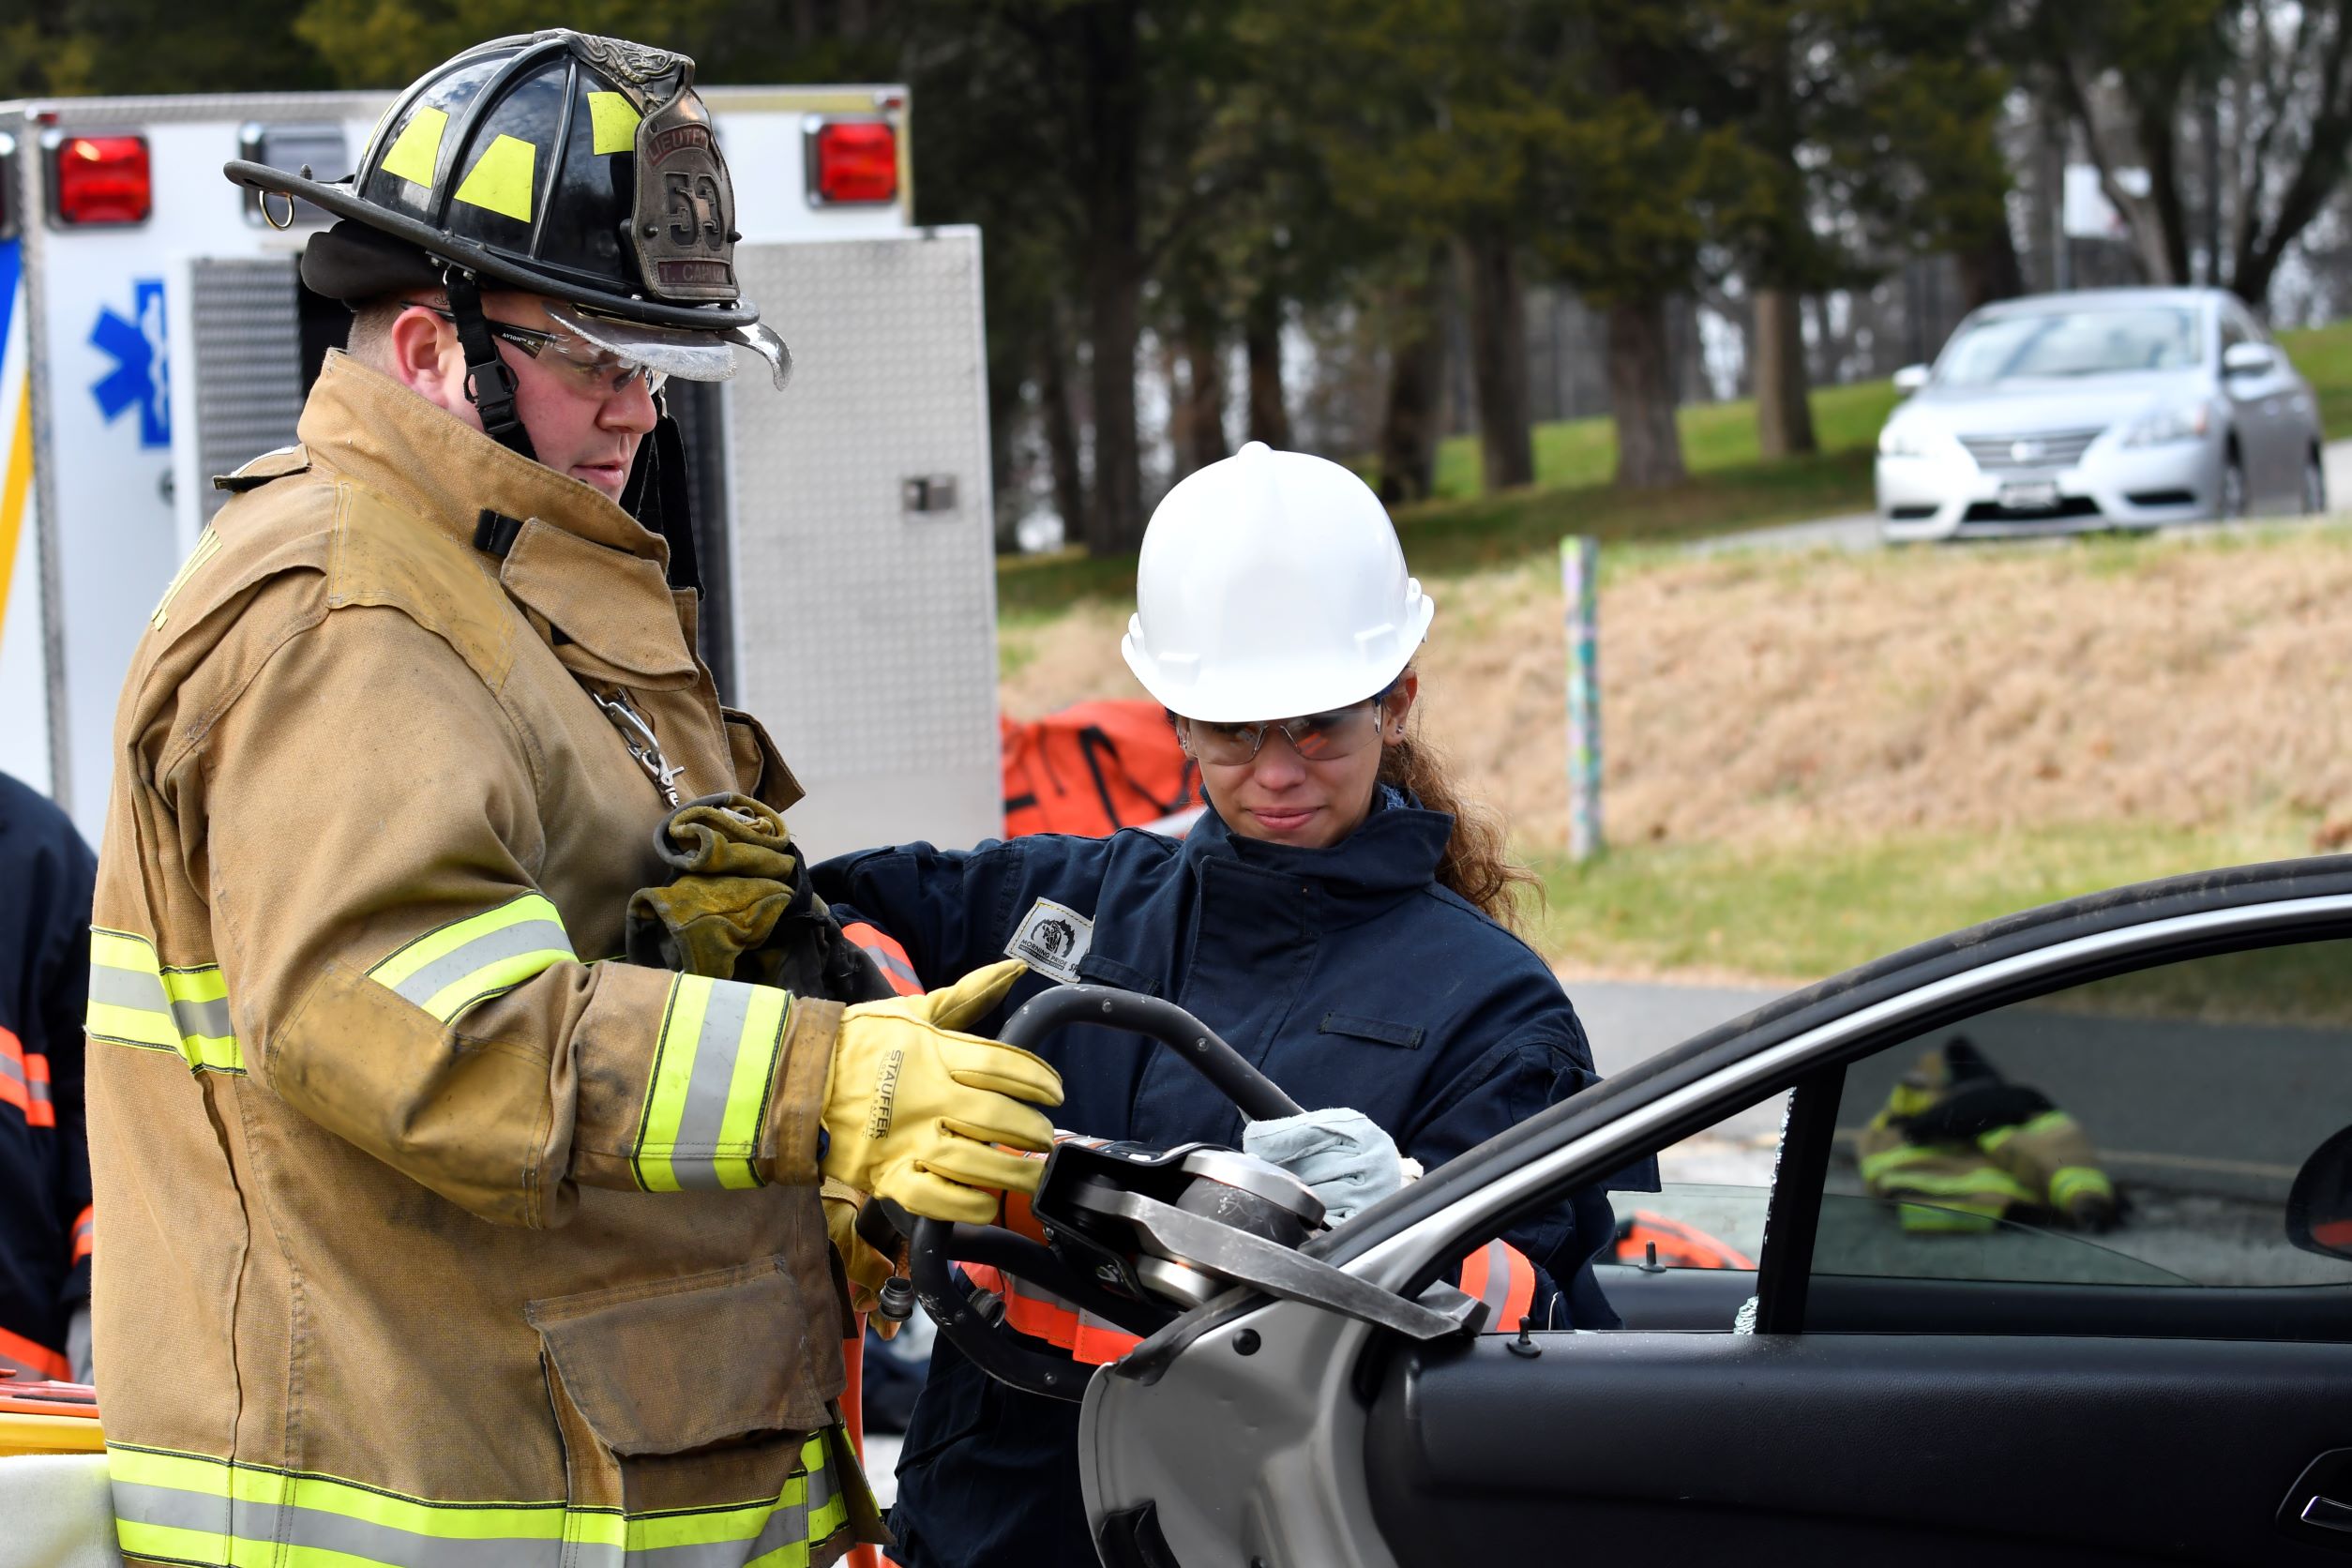 College Paramedic Coordinator/Broomall Fire Company Lieutenant Tim Capuzzi shows EMS-100 student Alexea Patton of Norwood how to use a hydraulic extrication rescue tool